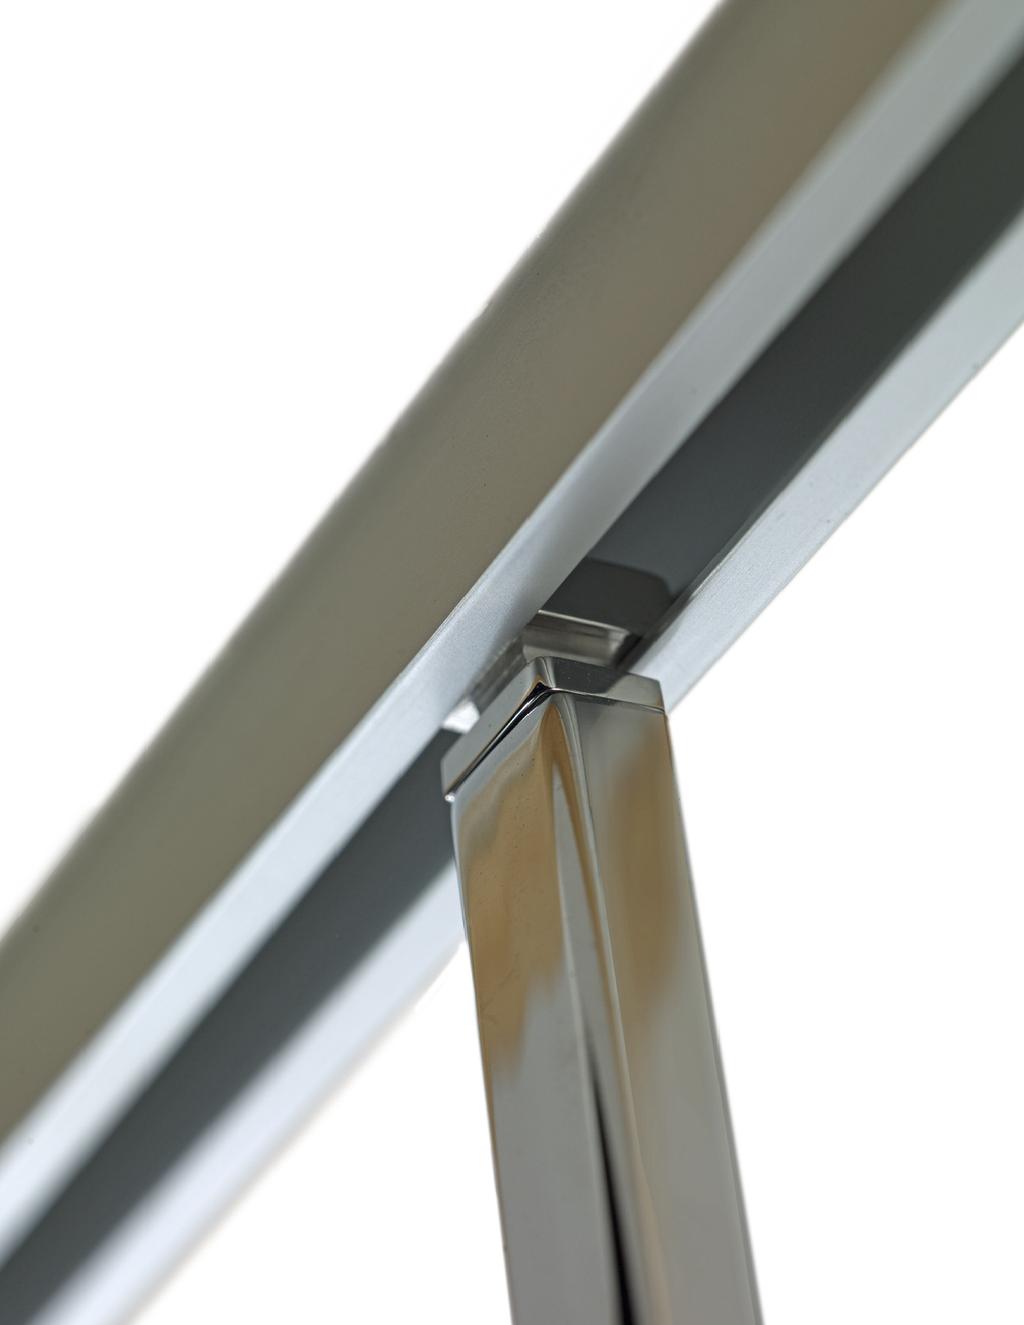 The Track and Upright All Uprights are suspended from an aluminum track, which can be screwed into a ceiling or window soffit.